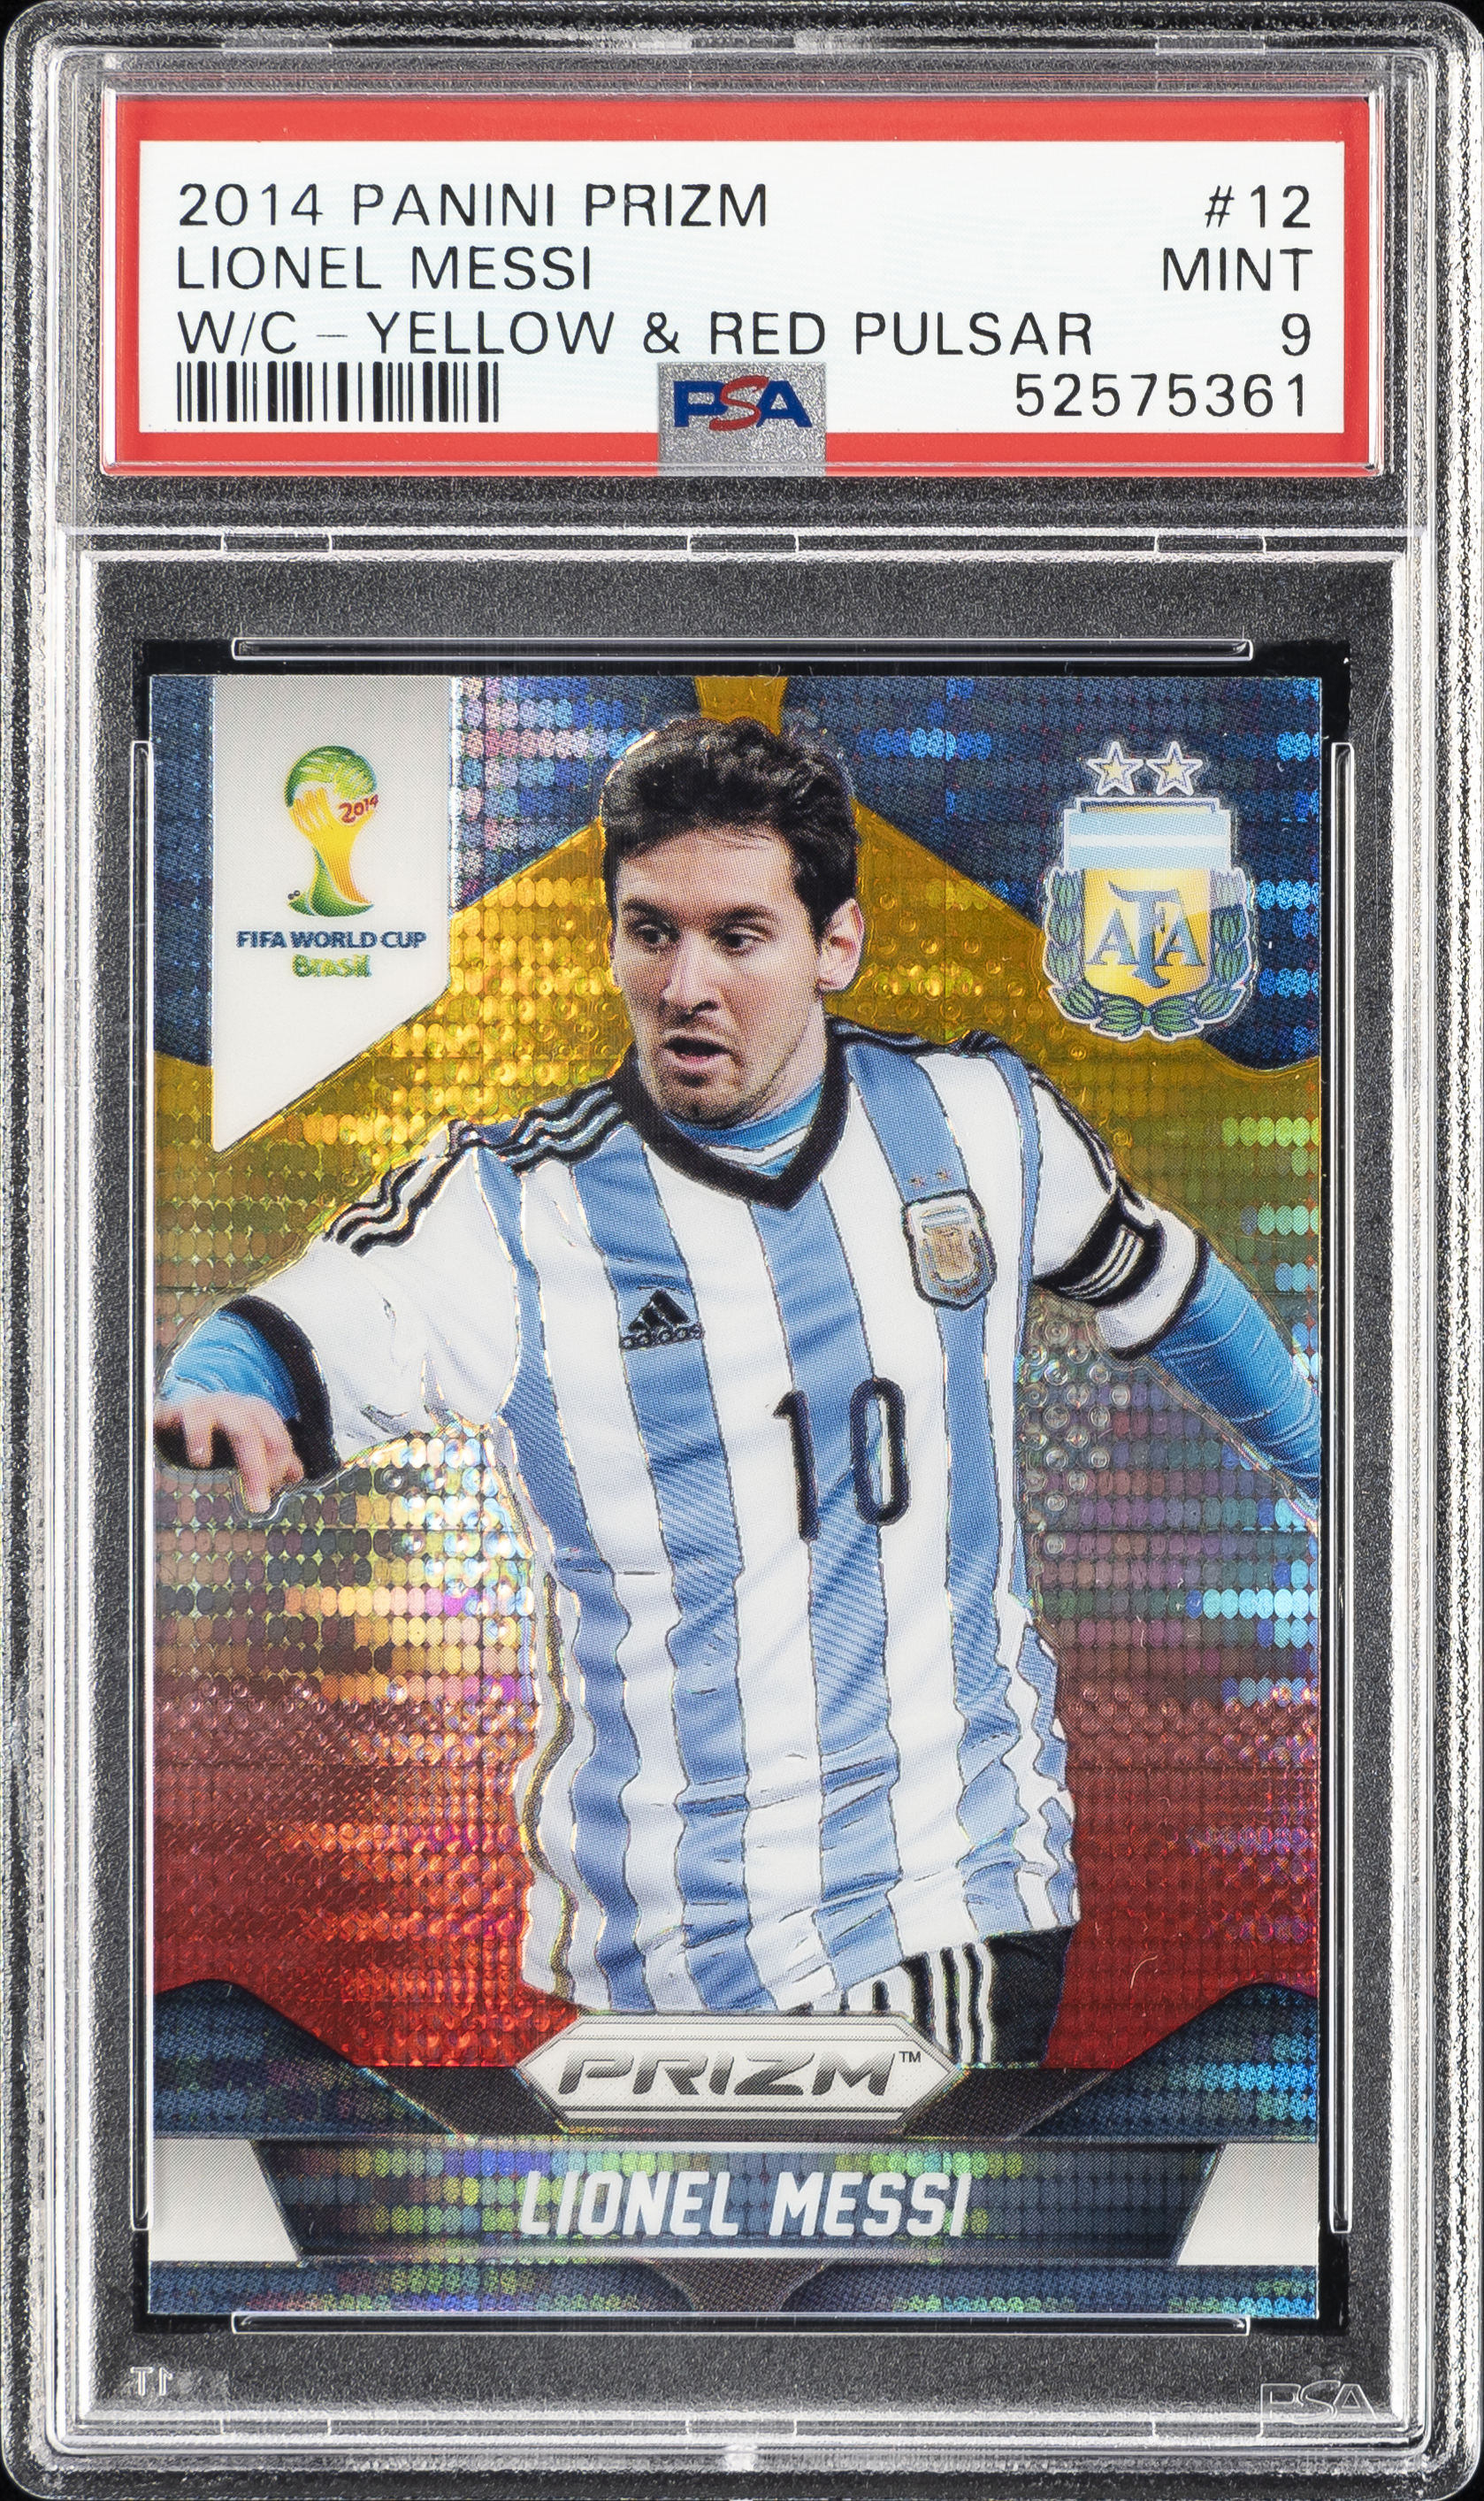 2014 Panini Prizm World Cup Yellow & Red Pulsar #12 Lionel Messi – PSA MINT 9